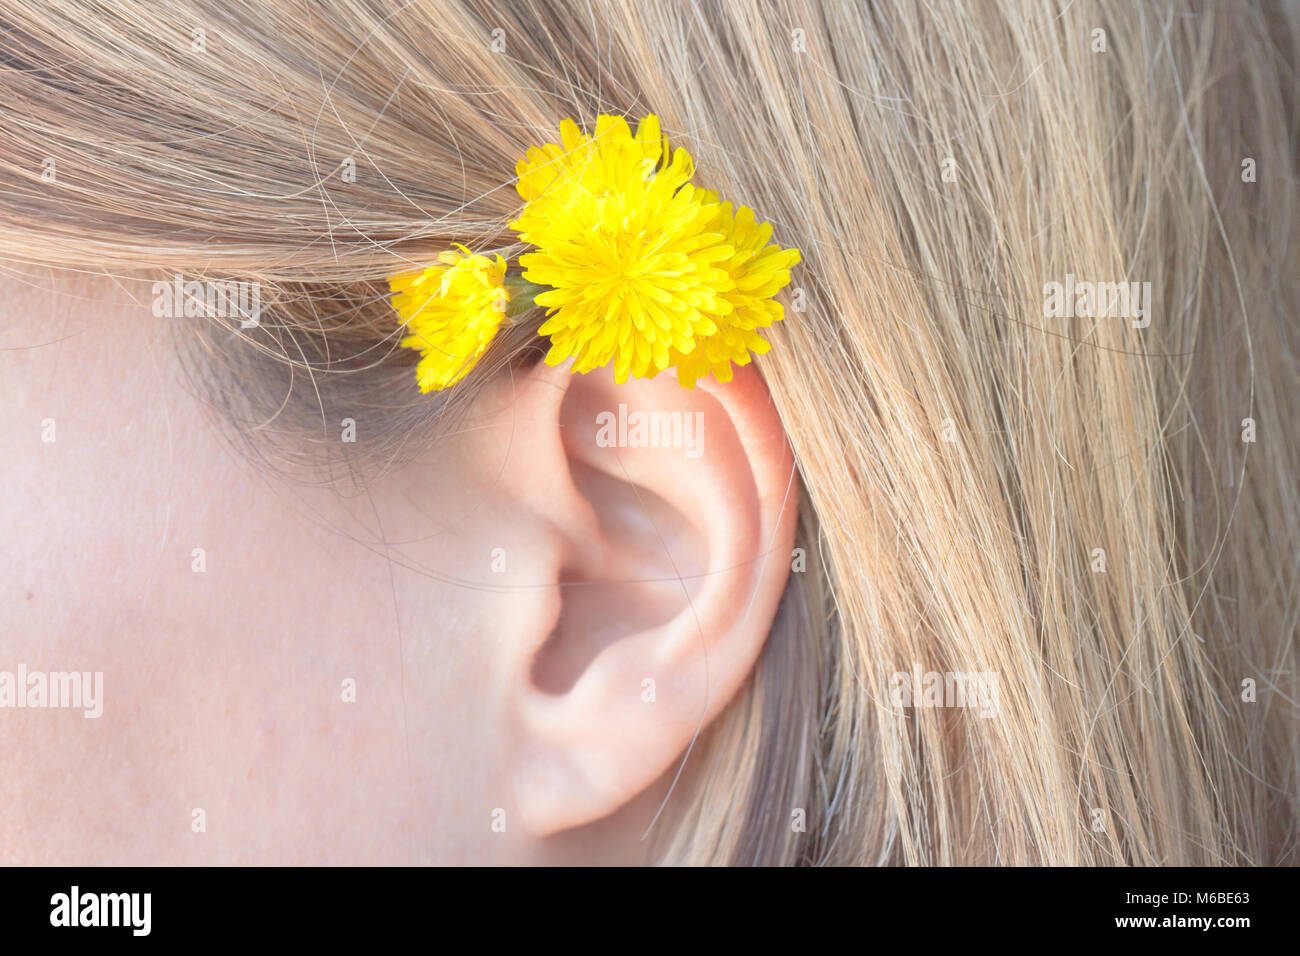 female human ear close up, with blonde hair and yellow flowers Stock Photo